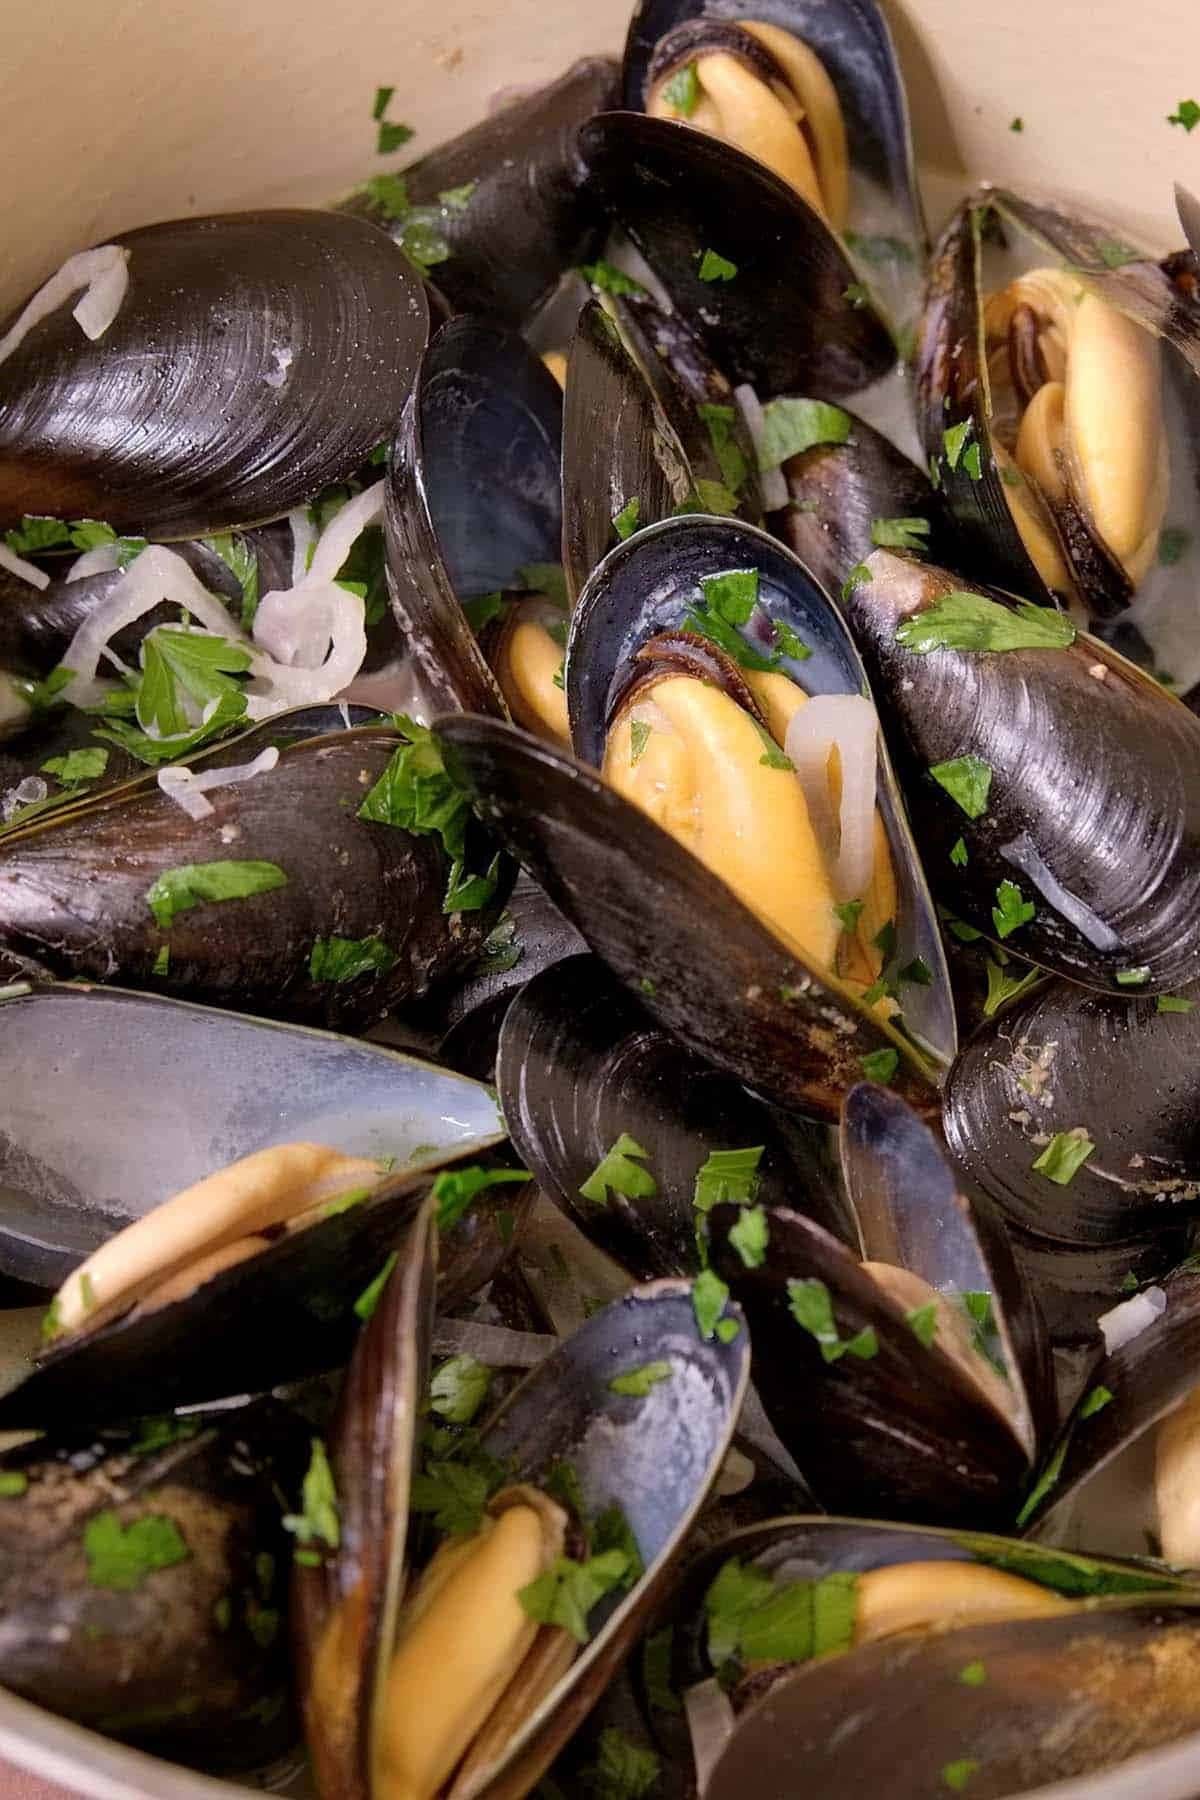 Cooked mussels garnished with chopped parsley leaves.